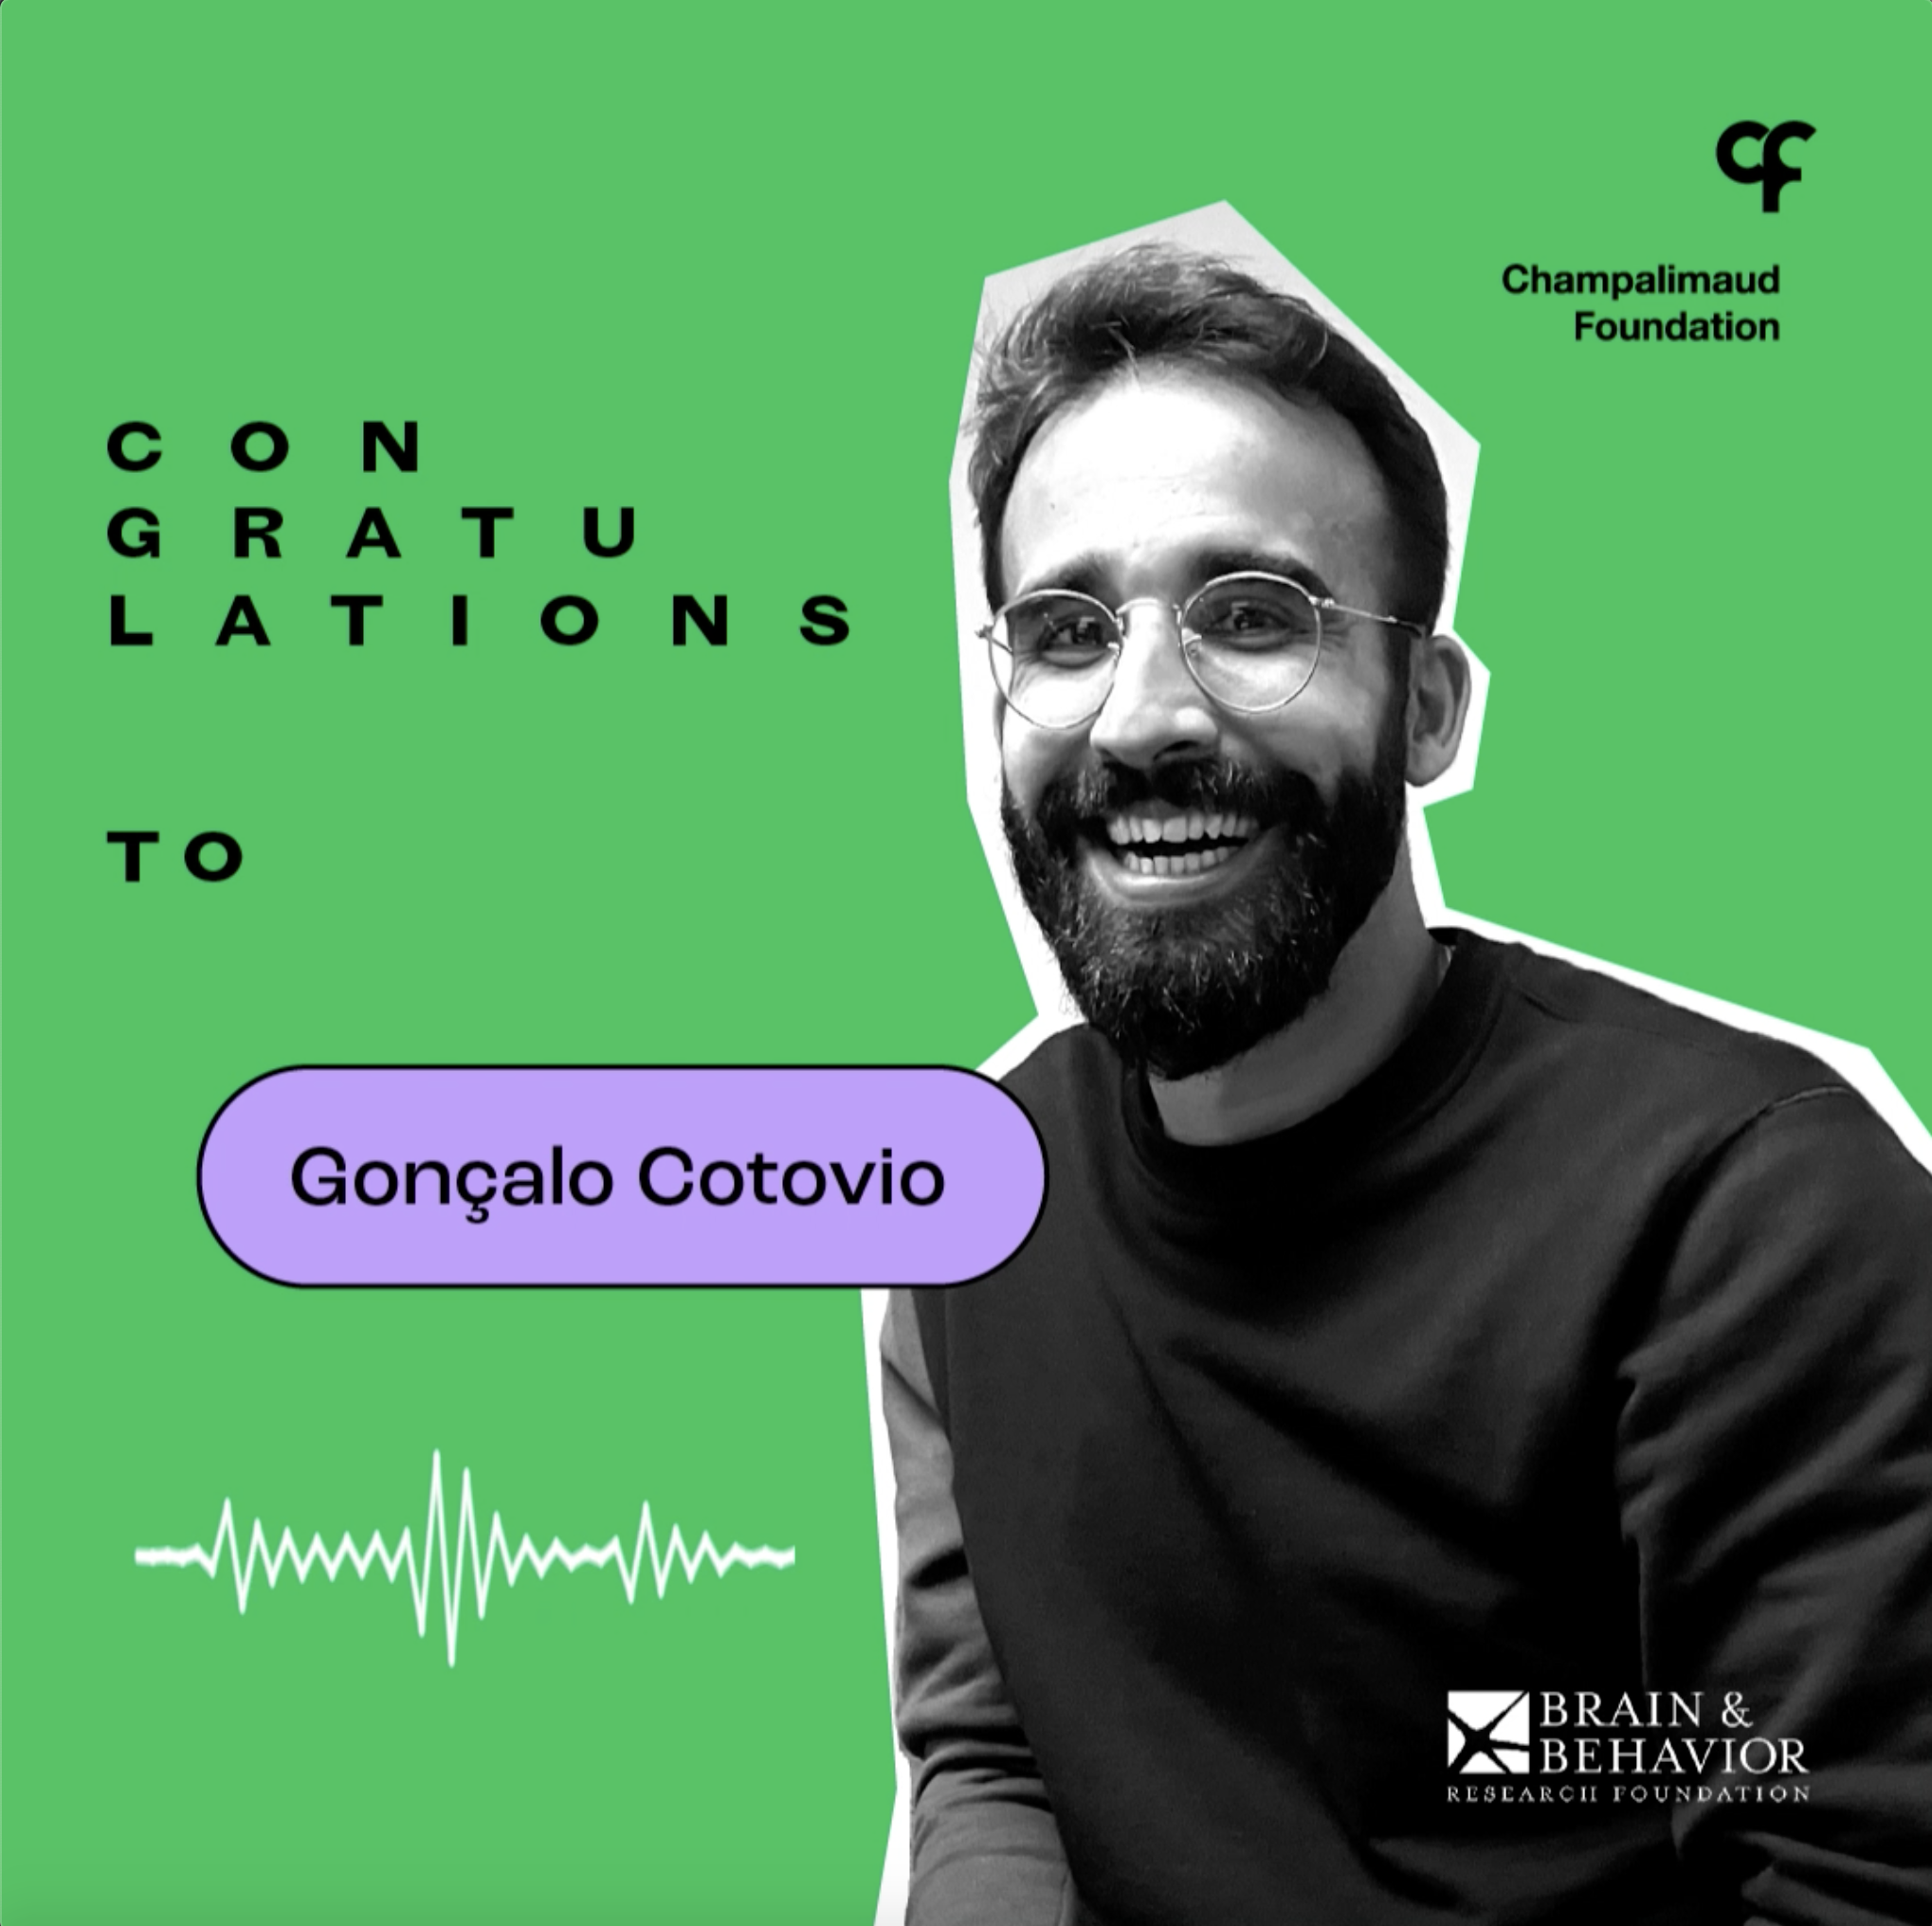 Audio Interview with Gonçalo Cotovio on Lesional OCD using TMS